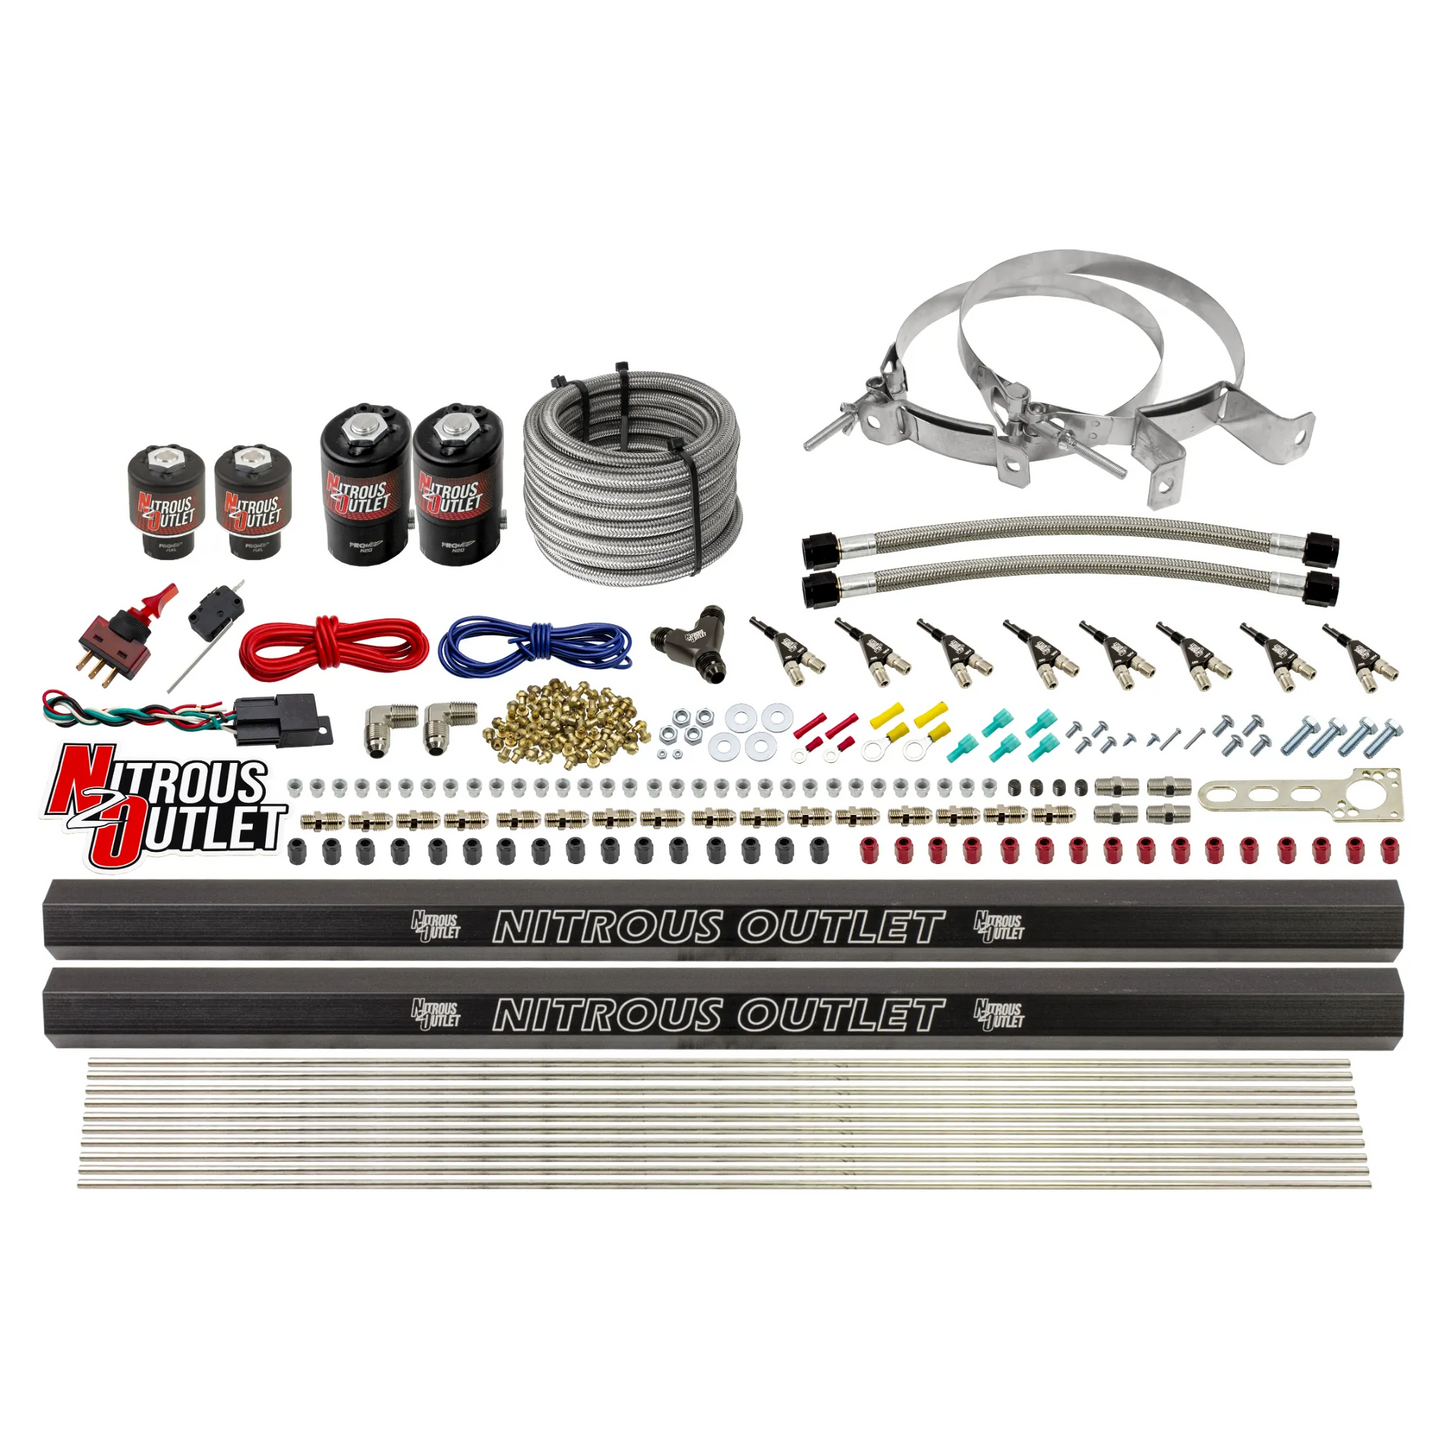 8 Cylinder Single Stage Direct Port Nitrous System with Injection Rails - Gas - .112 Nitrous/.177 Fuel